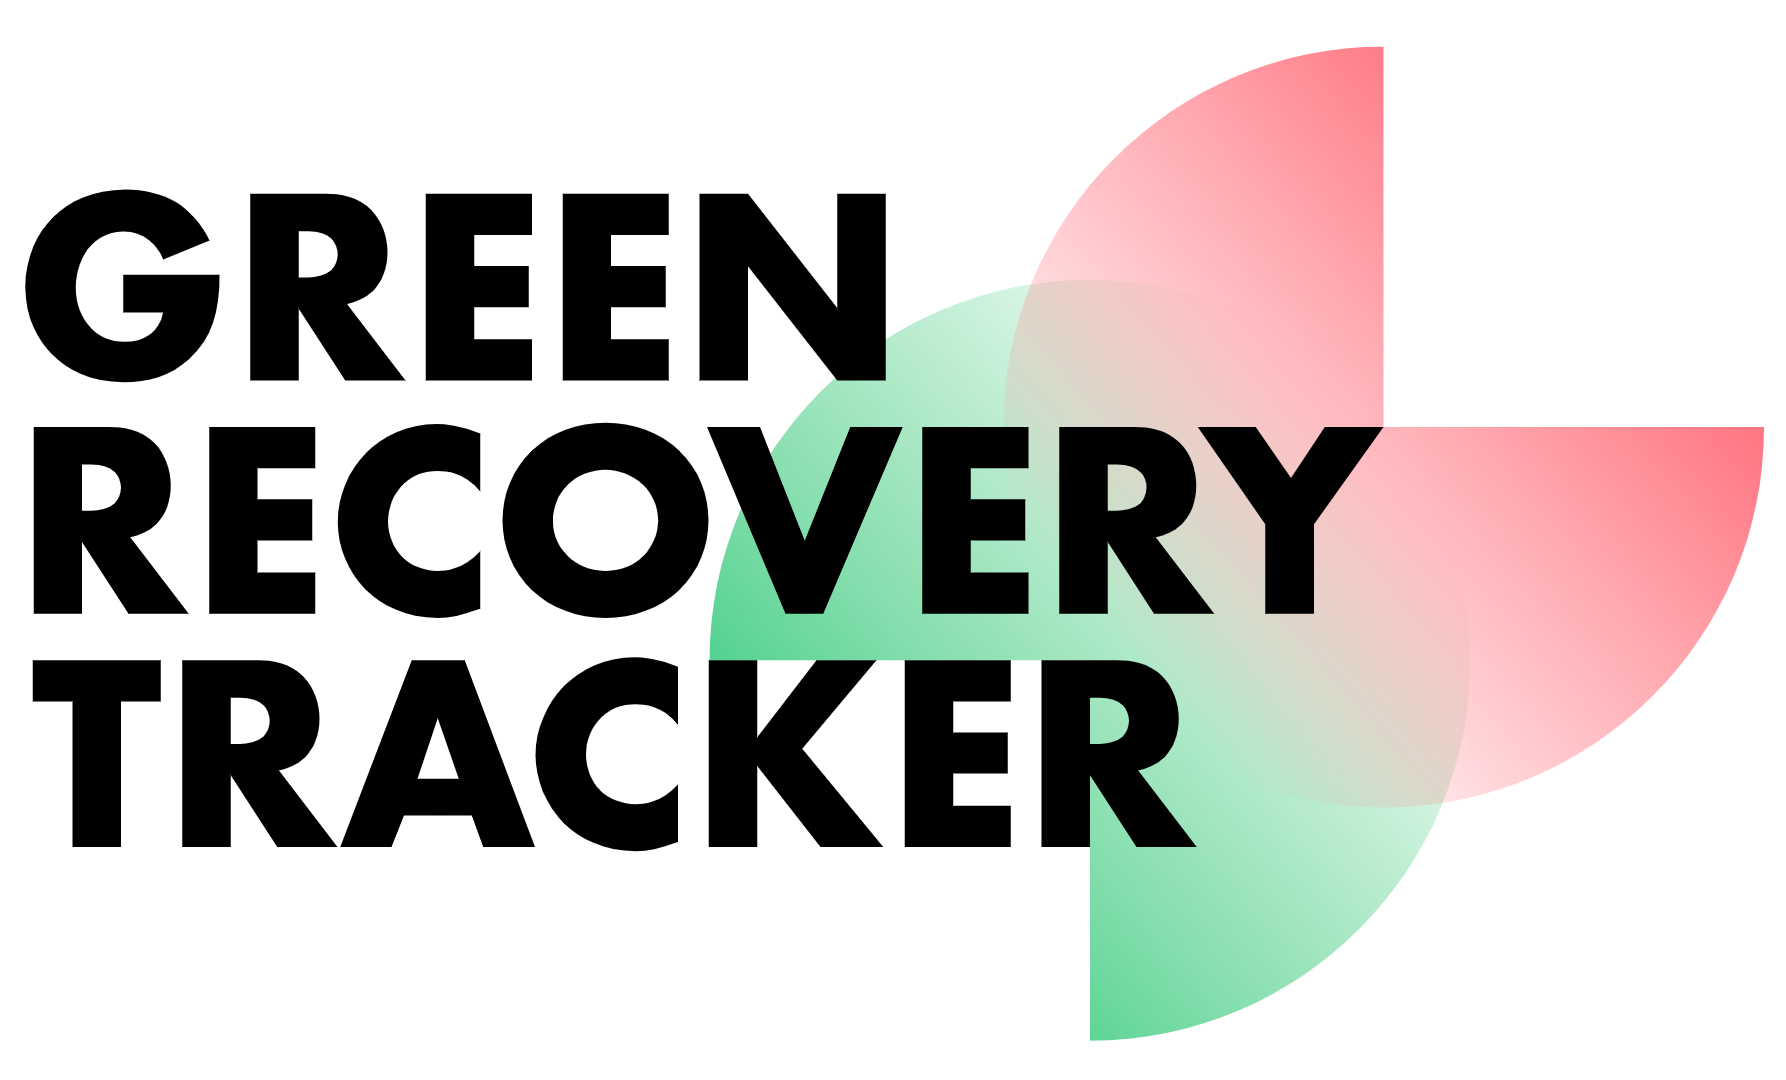 Green Recovery Tracker